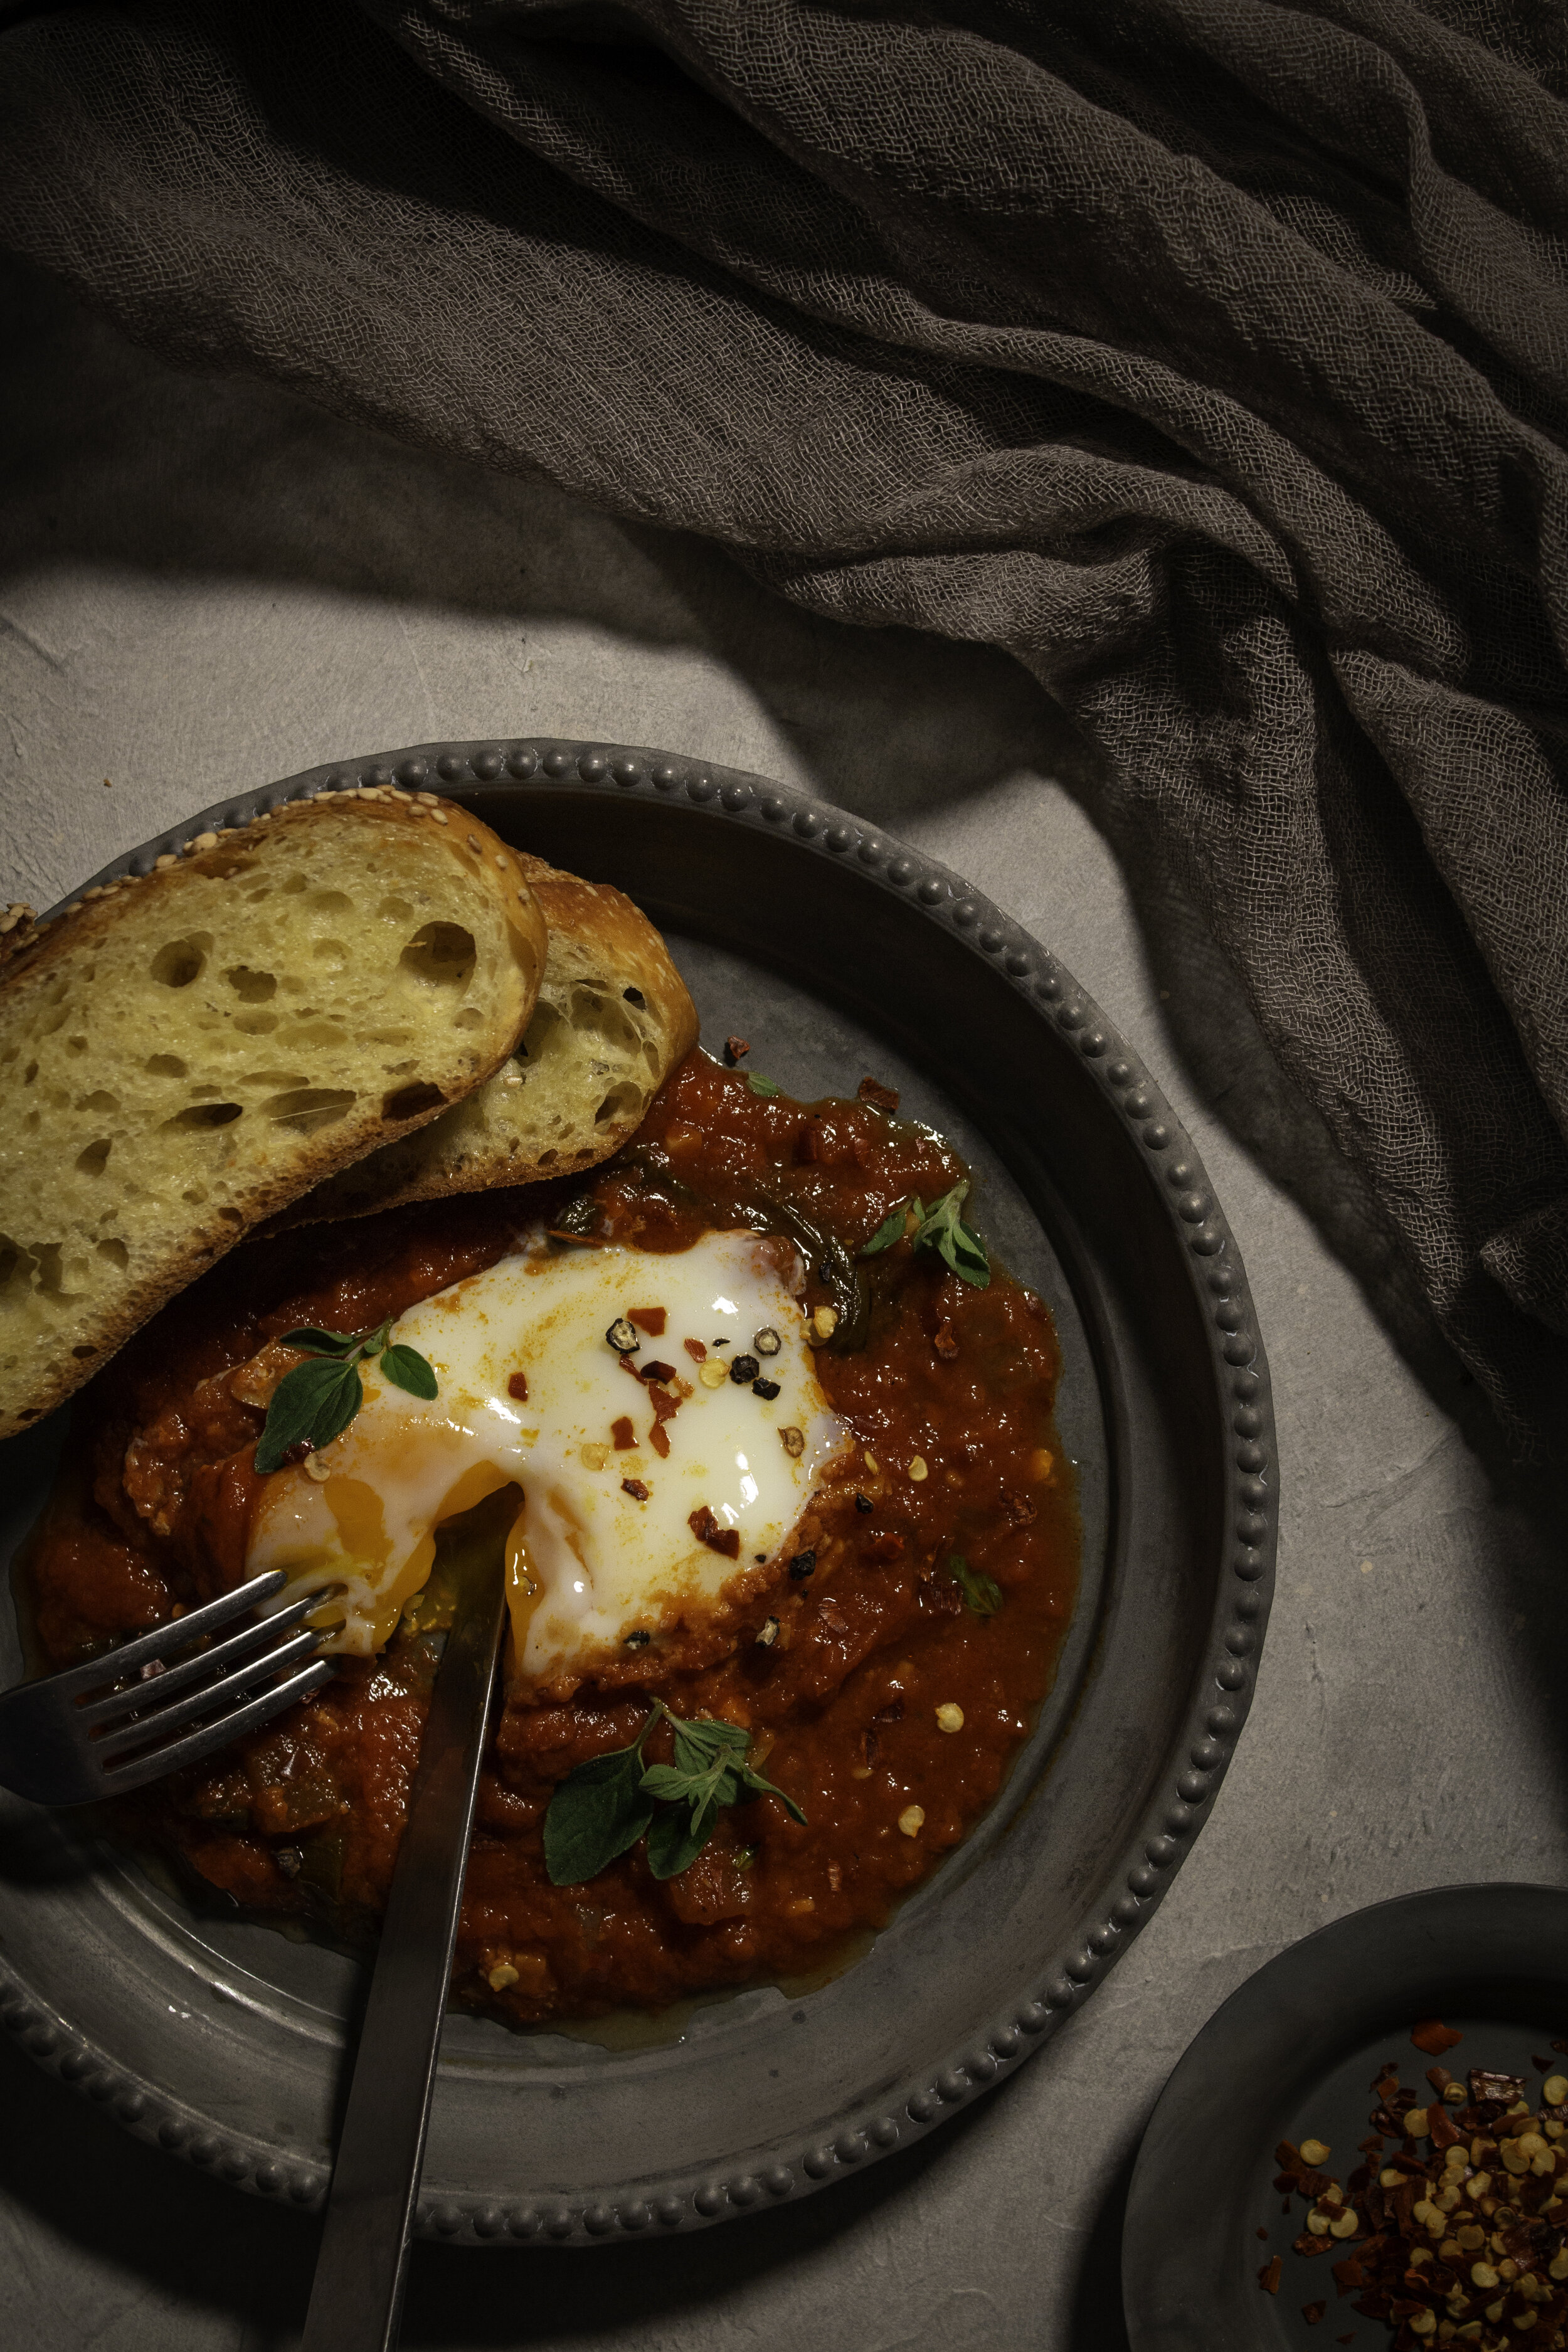 Soft cooked egg in tomato sauce with crostini on a grey plate.